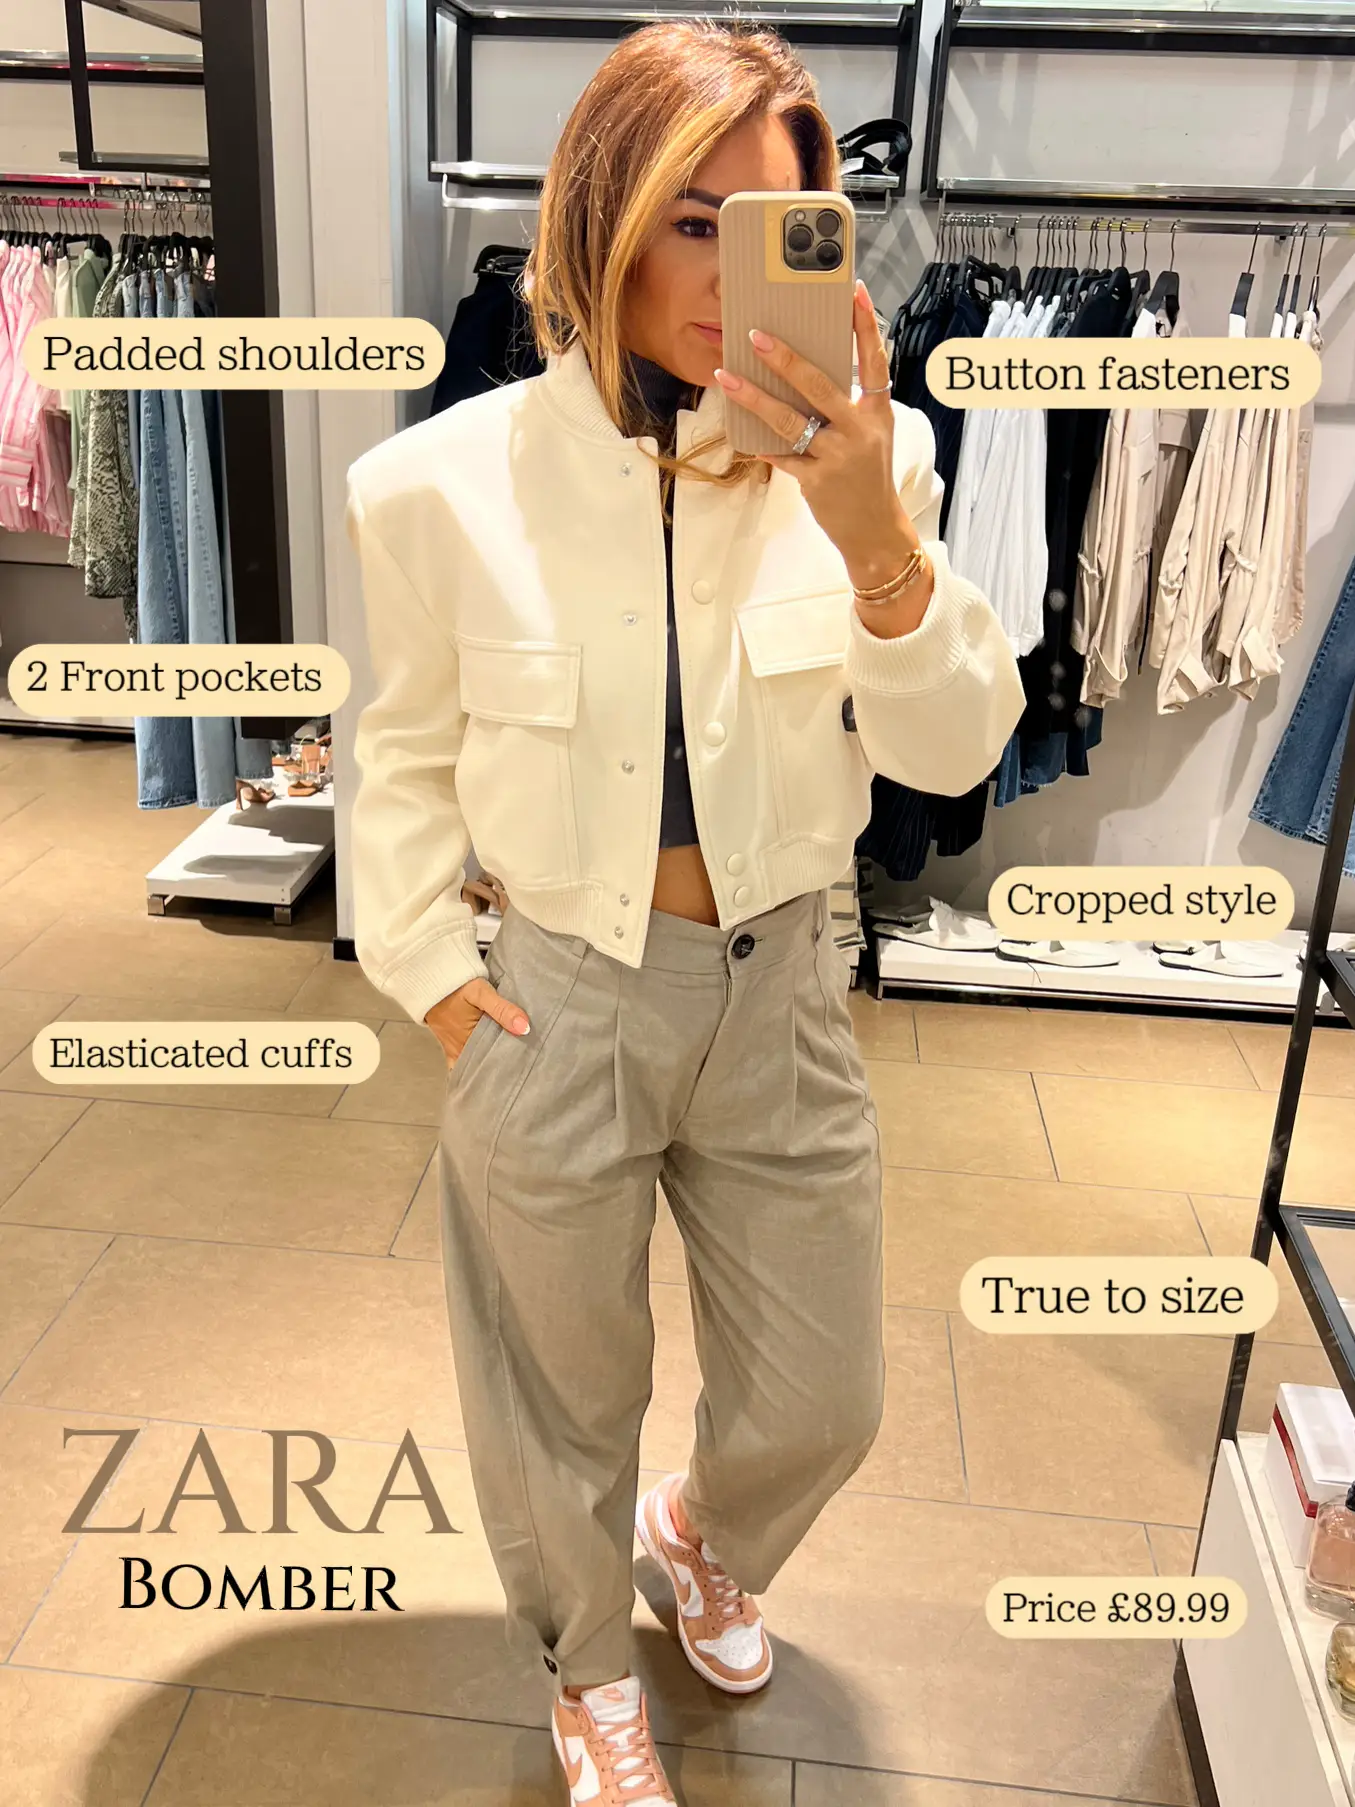 ZARA BOMBER JACKET Review, Gallery posted by Ashleypfashion